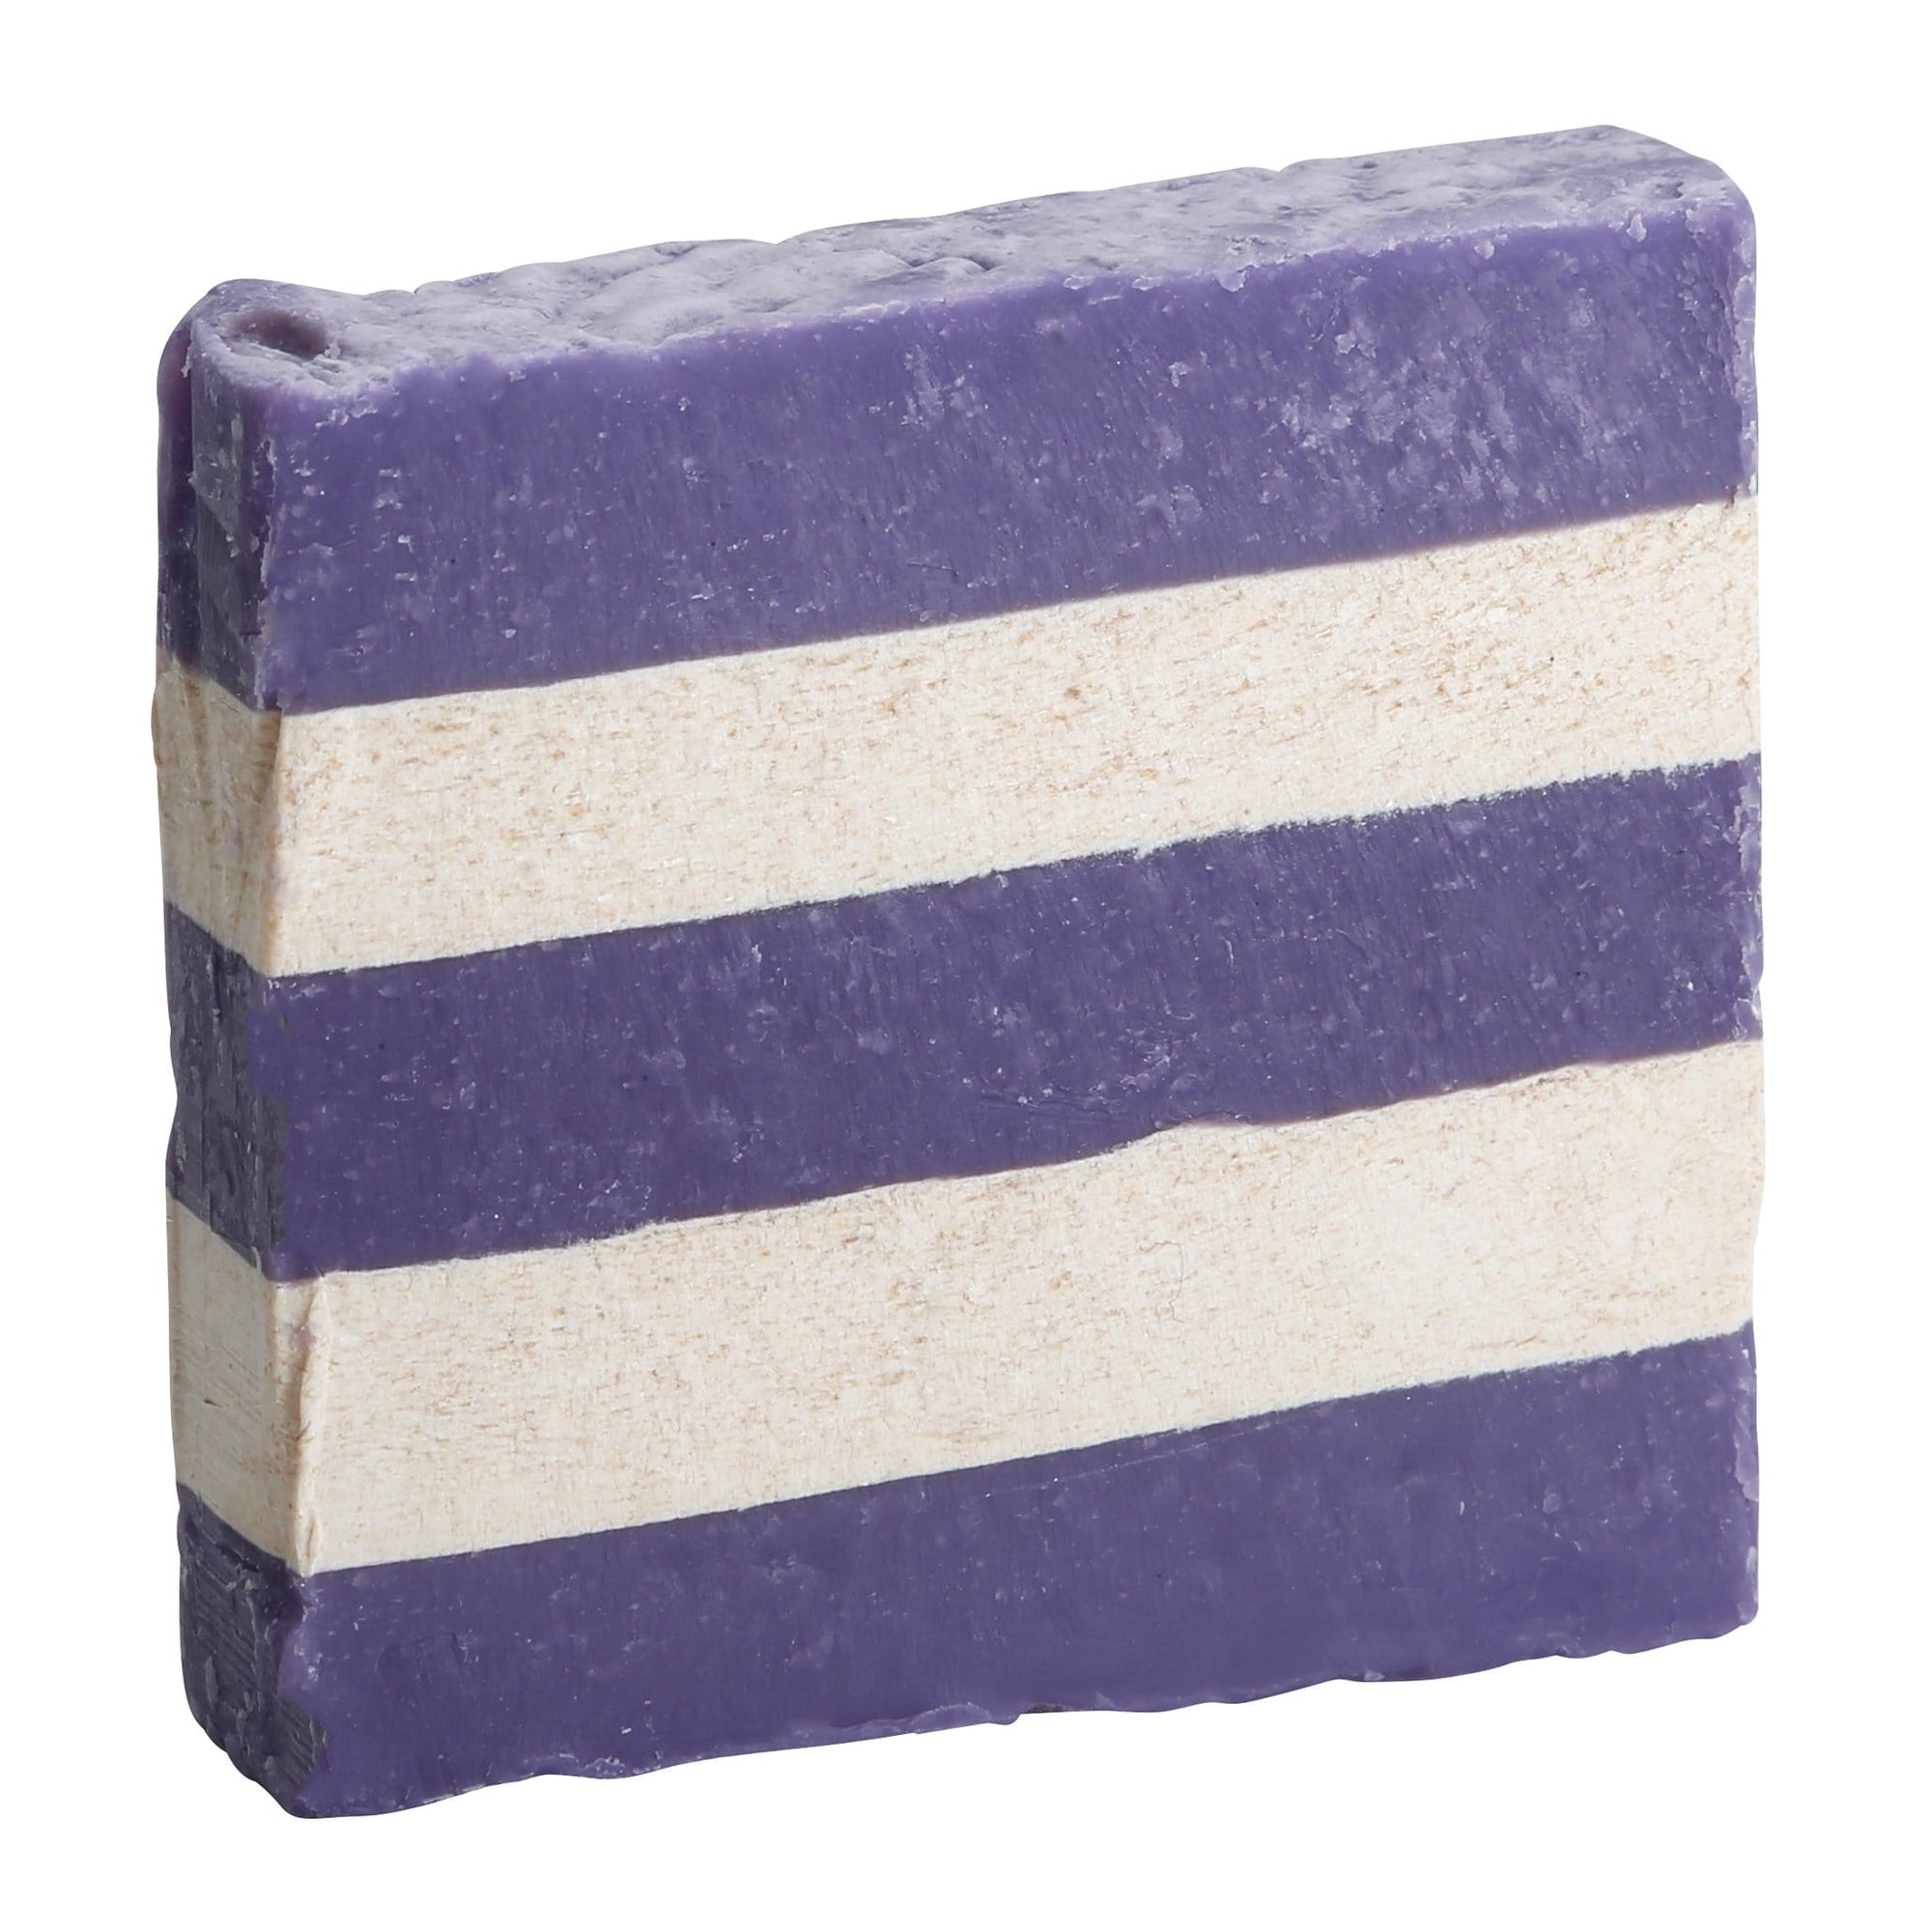 Goats in the Lavender Natural Soap